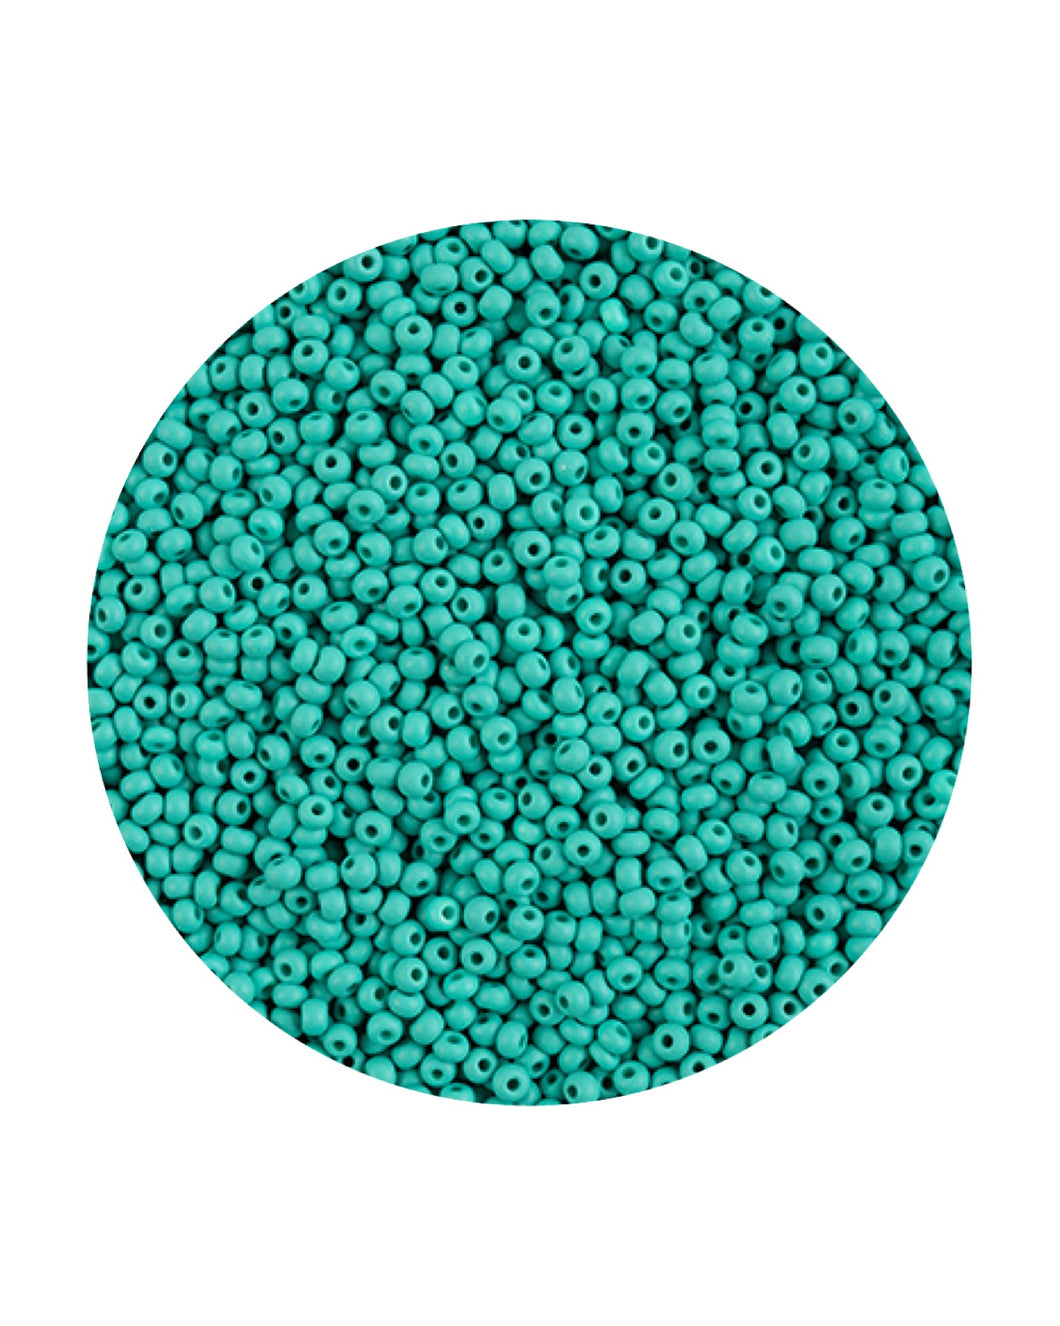 11/0 Preciosa Permalux Seed Beads Dyed Chalk Sea Green Matte, 23g Bags